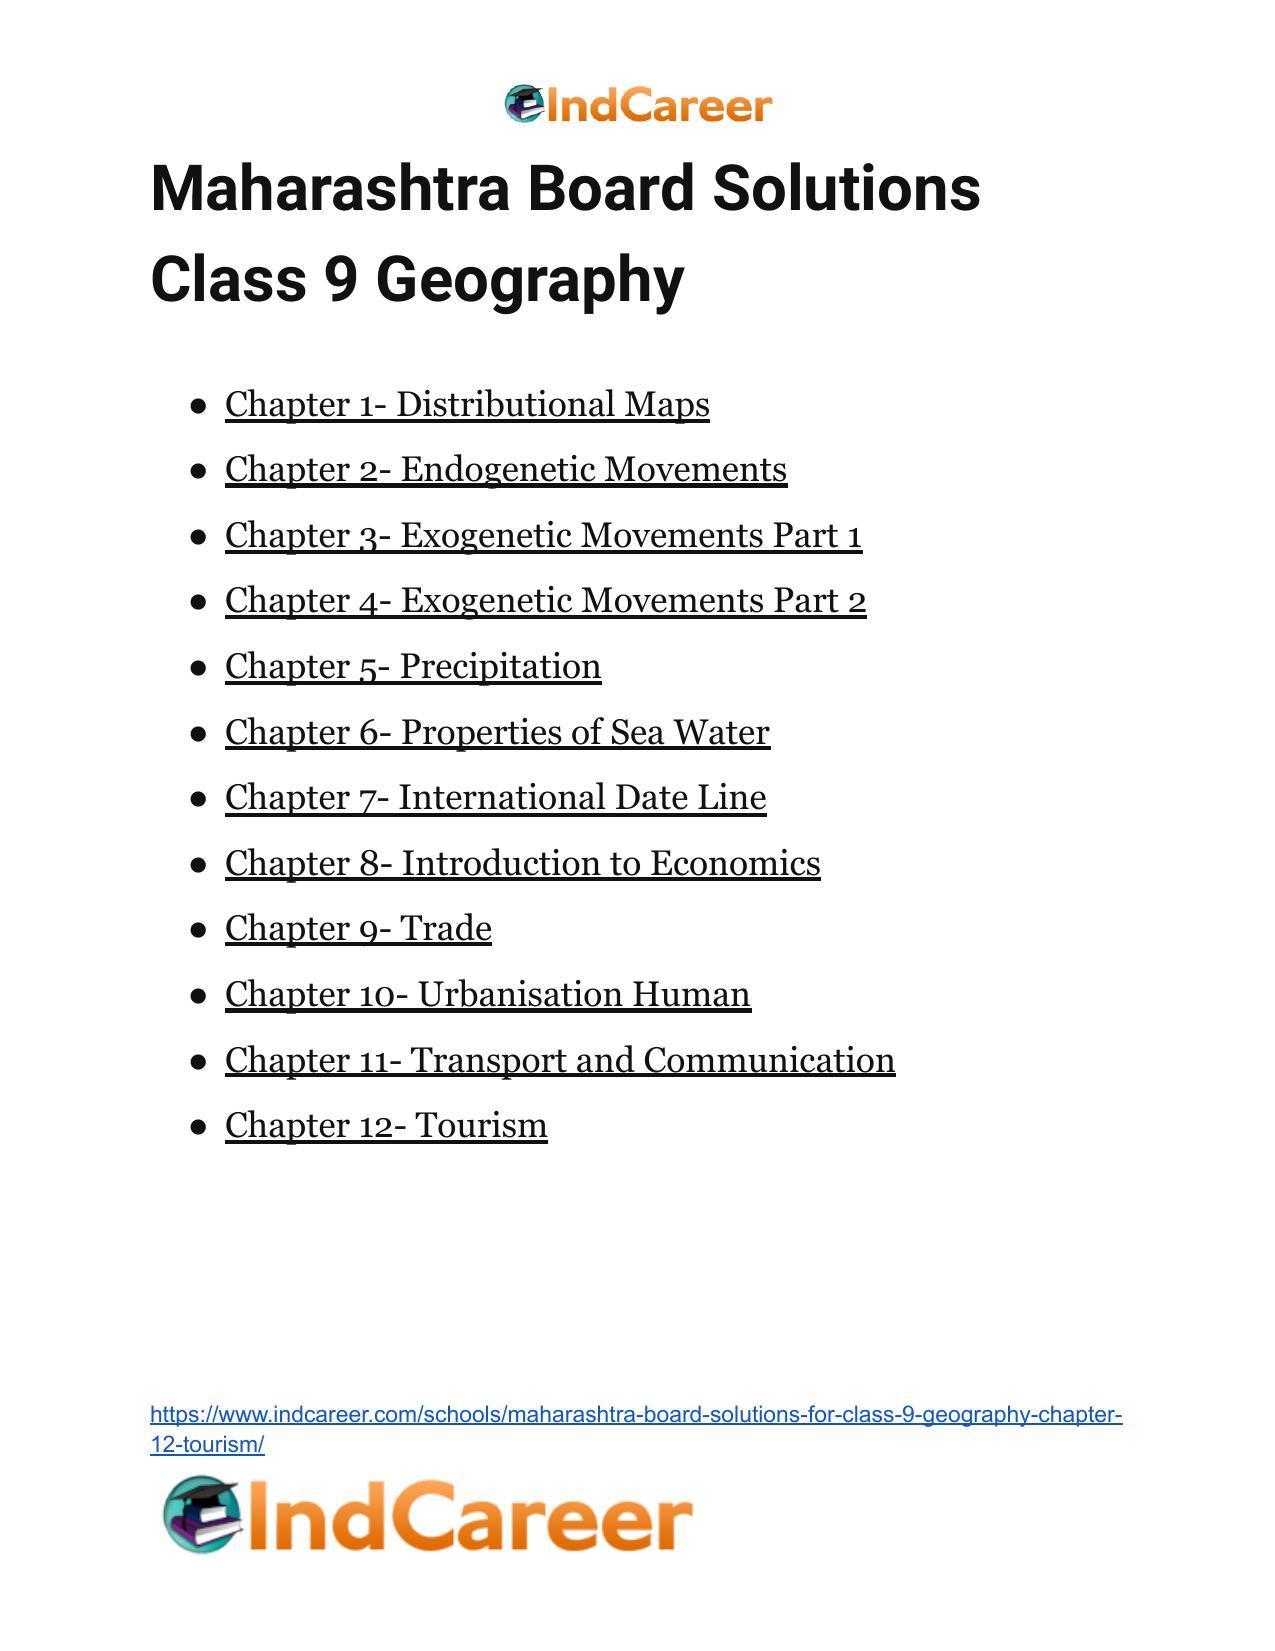 Maharashtra Board Solutions for Class 9- Geography: Chapter 12- Tourism - Page 36